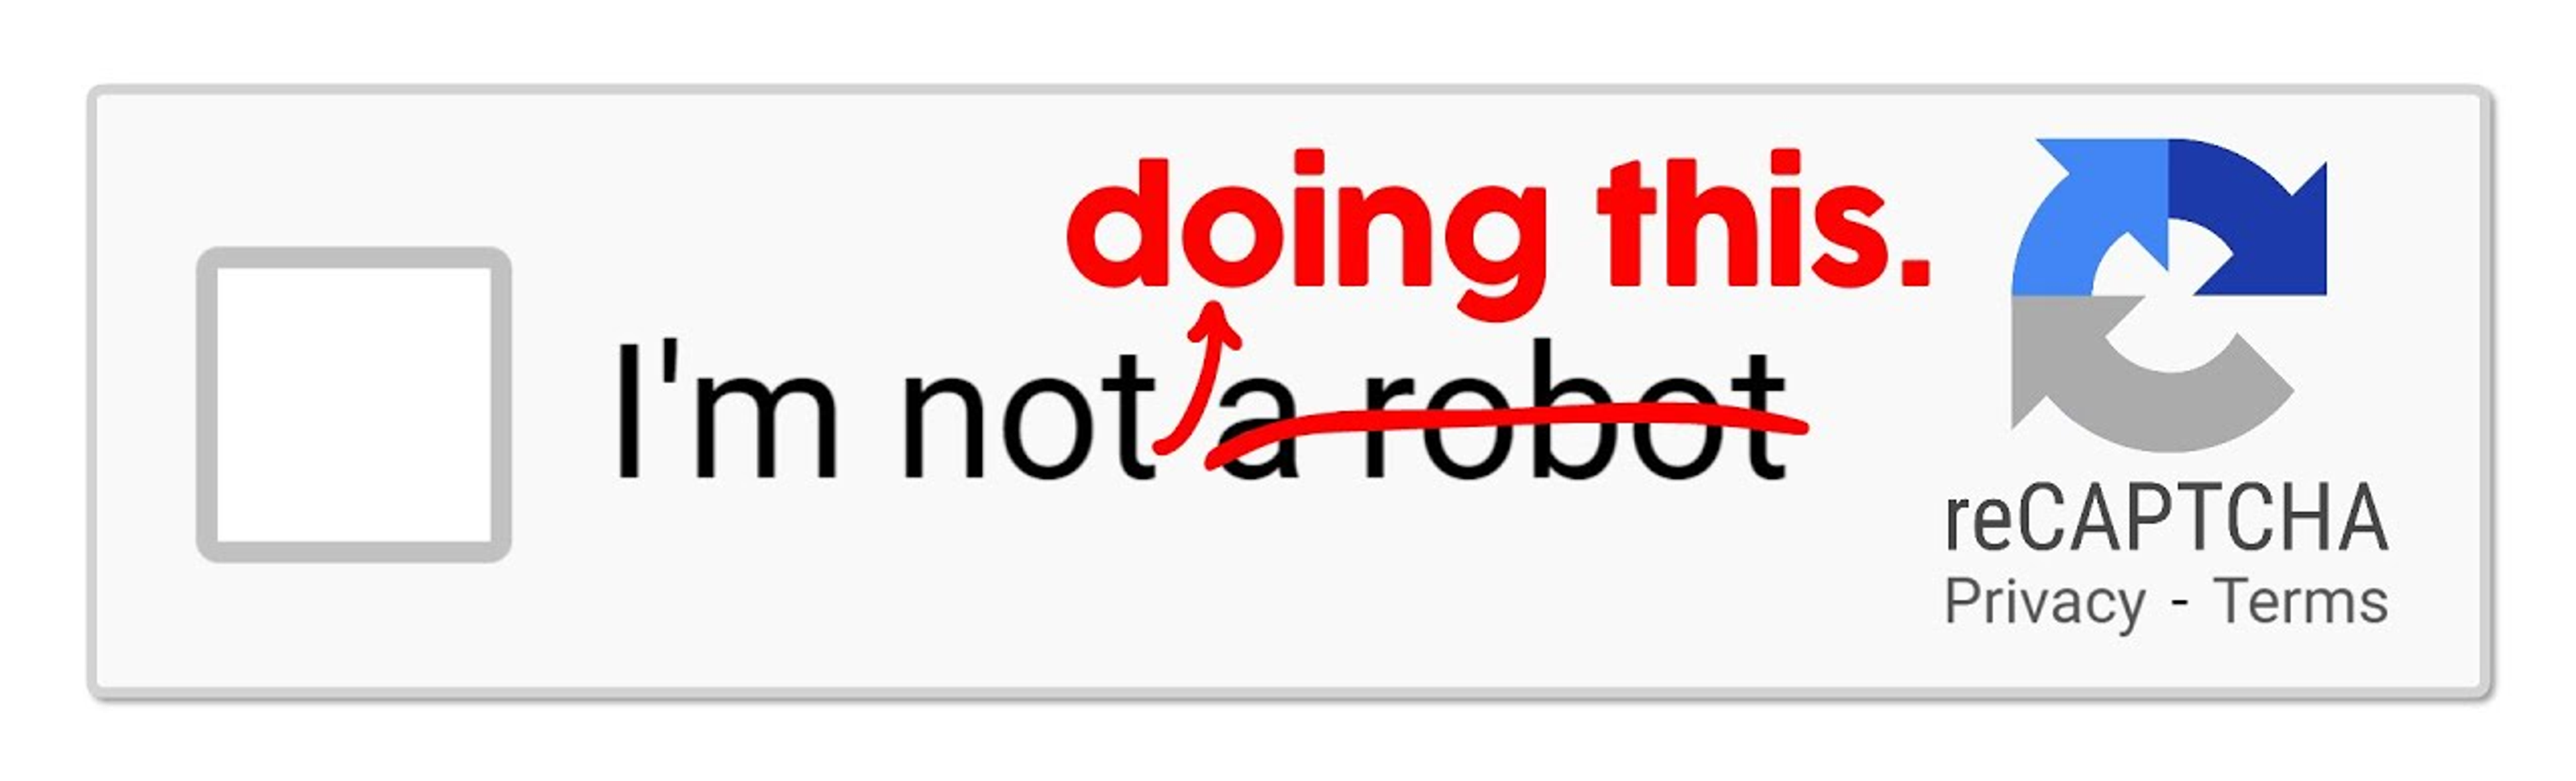 A screenshot of a reCAPTCHA UI, annotated to modify the default language of "I'm not a robot" to "I'm not doing this."